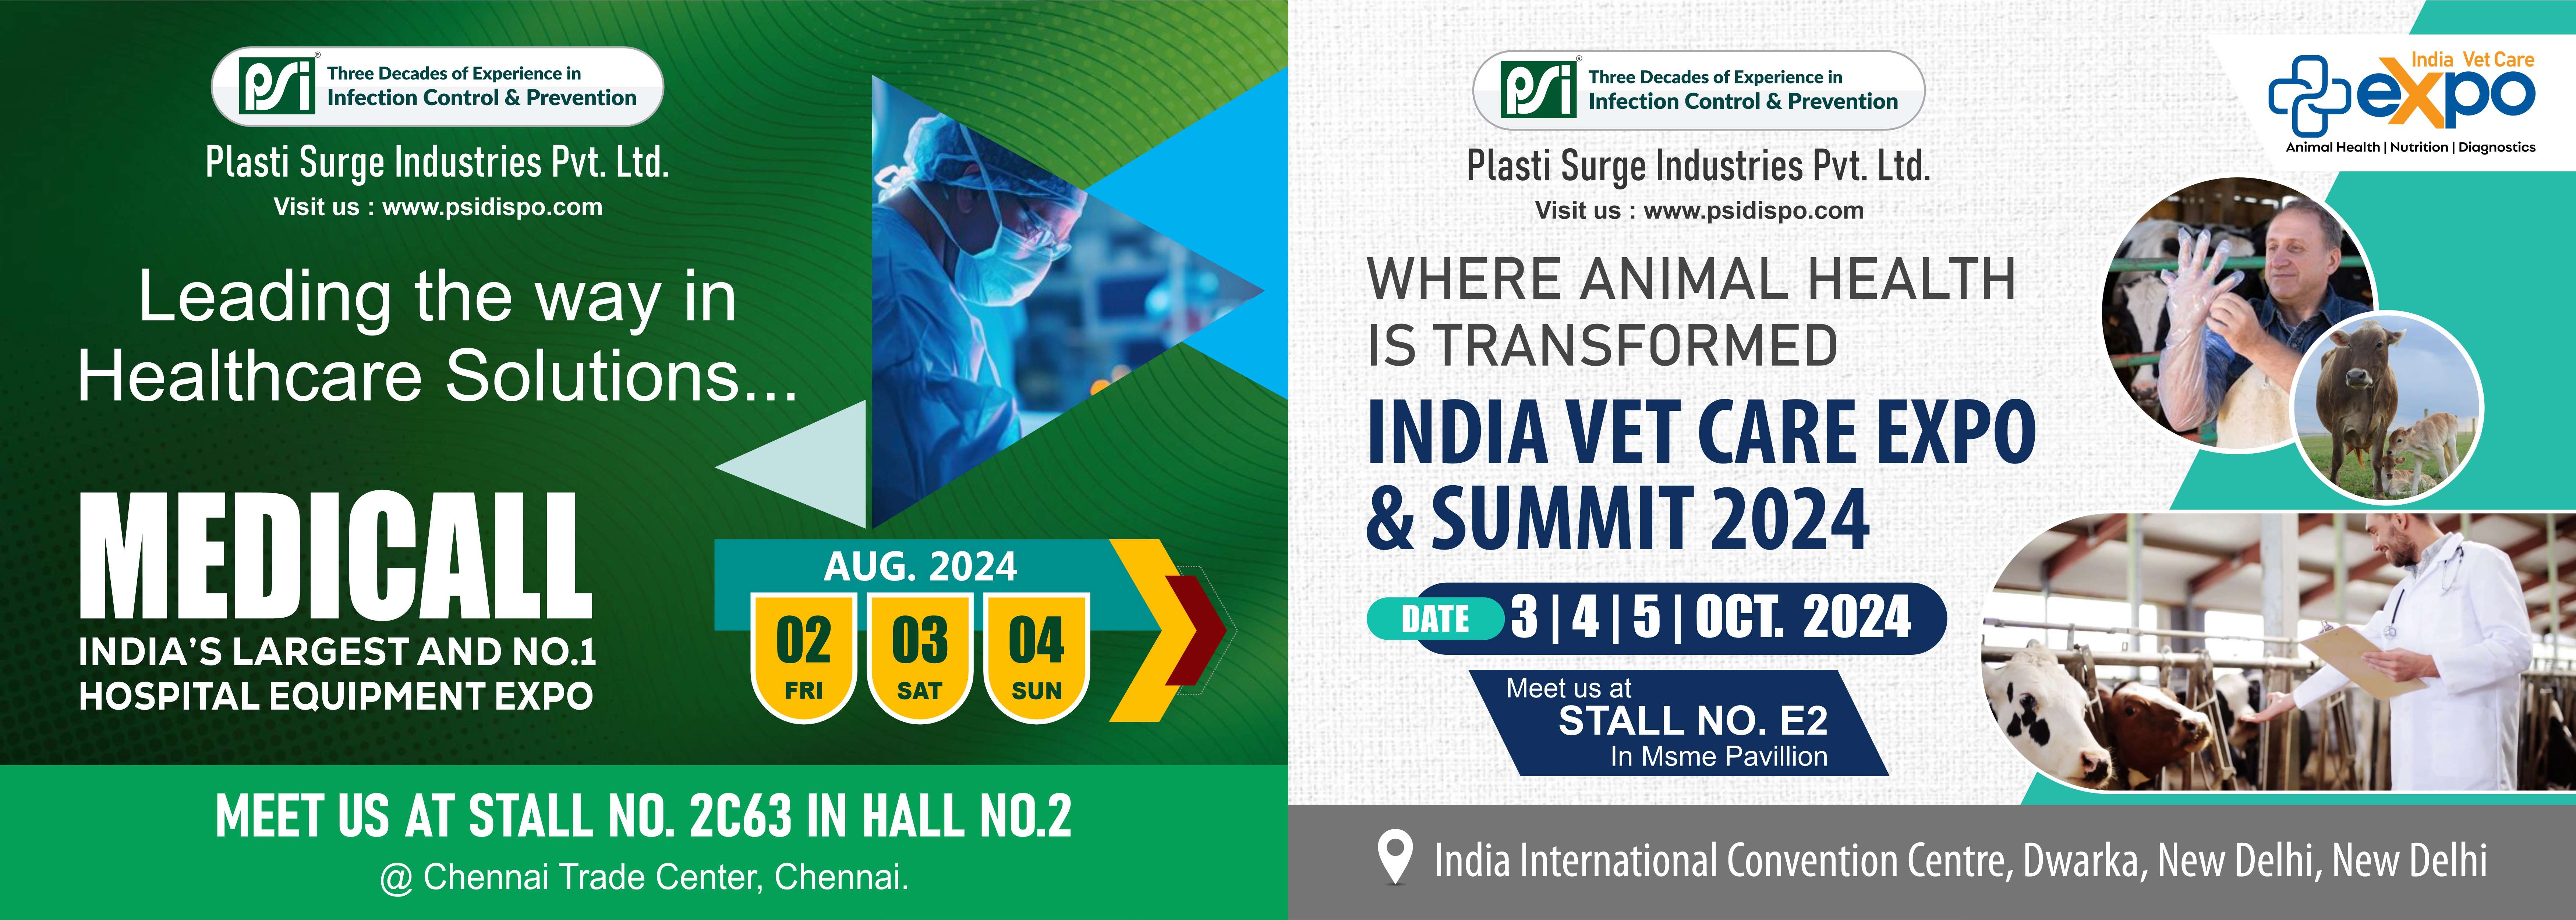  Medicall & Vet care expo Manufacturers in Maharashtra